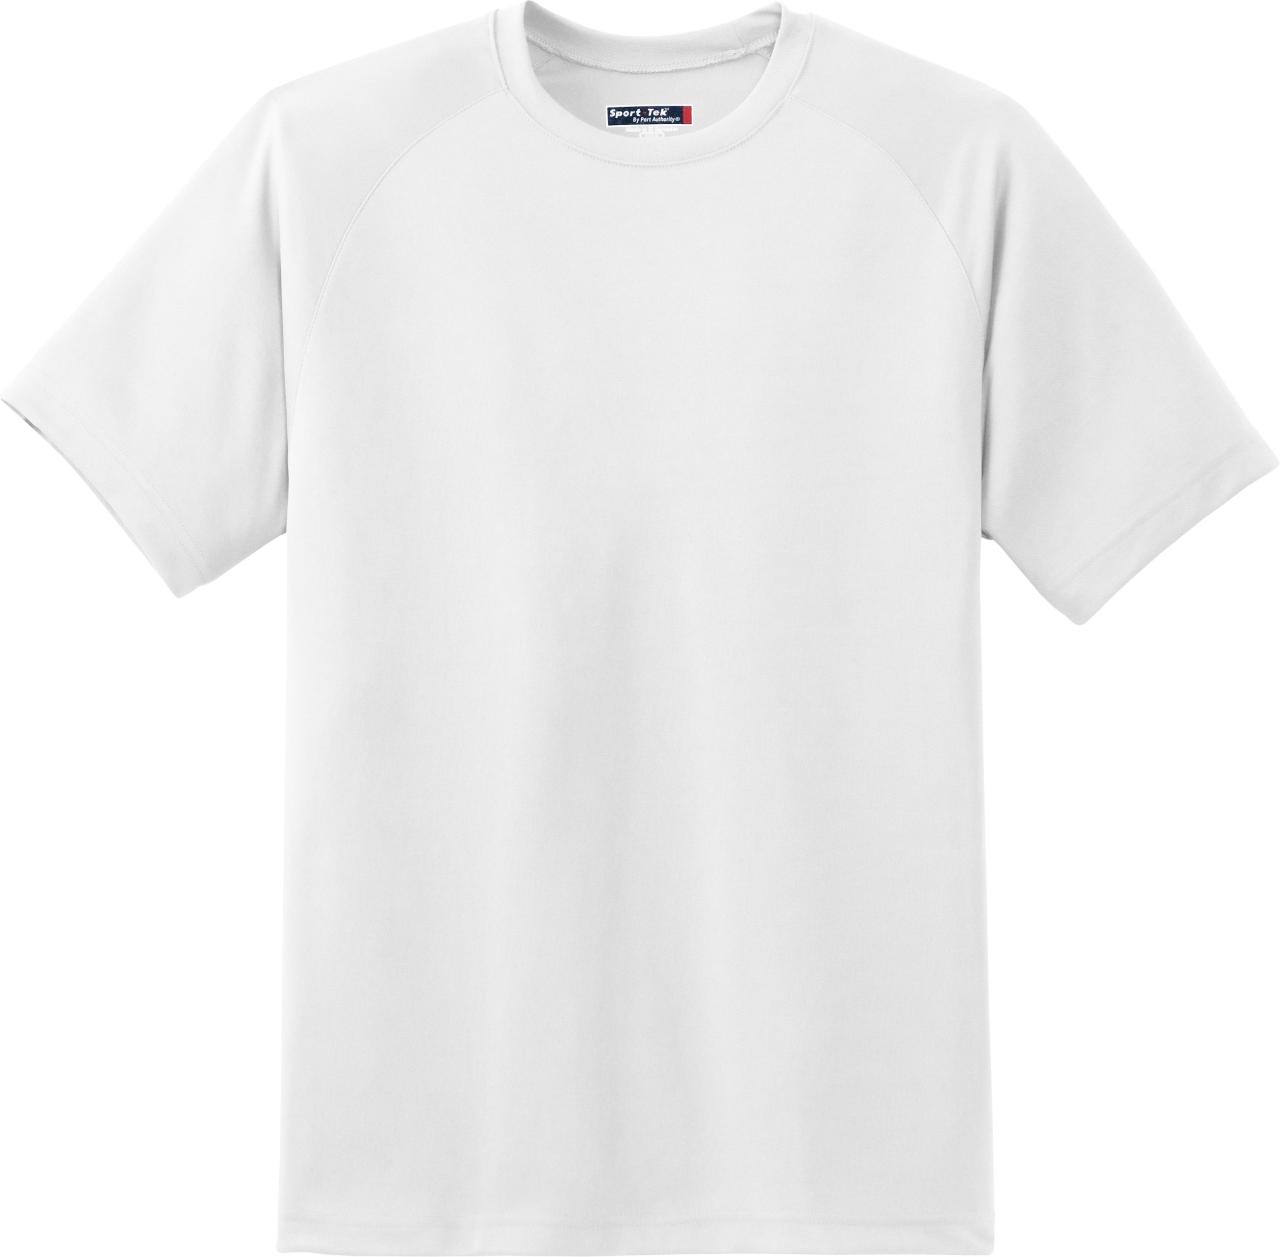 White Tee Shirt Template Front And Back